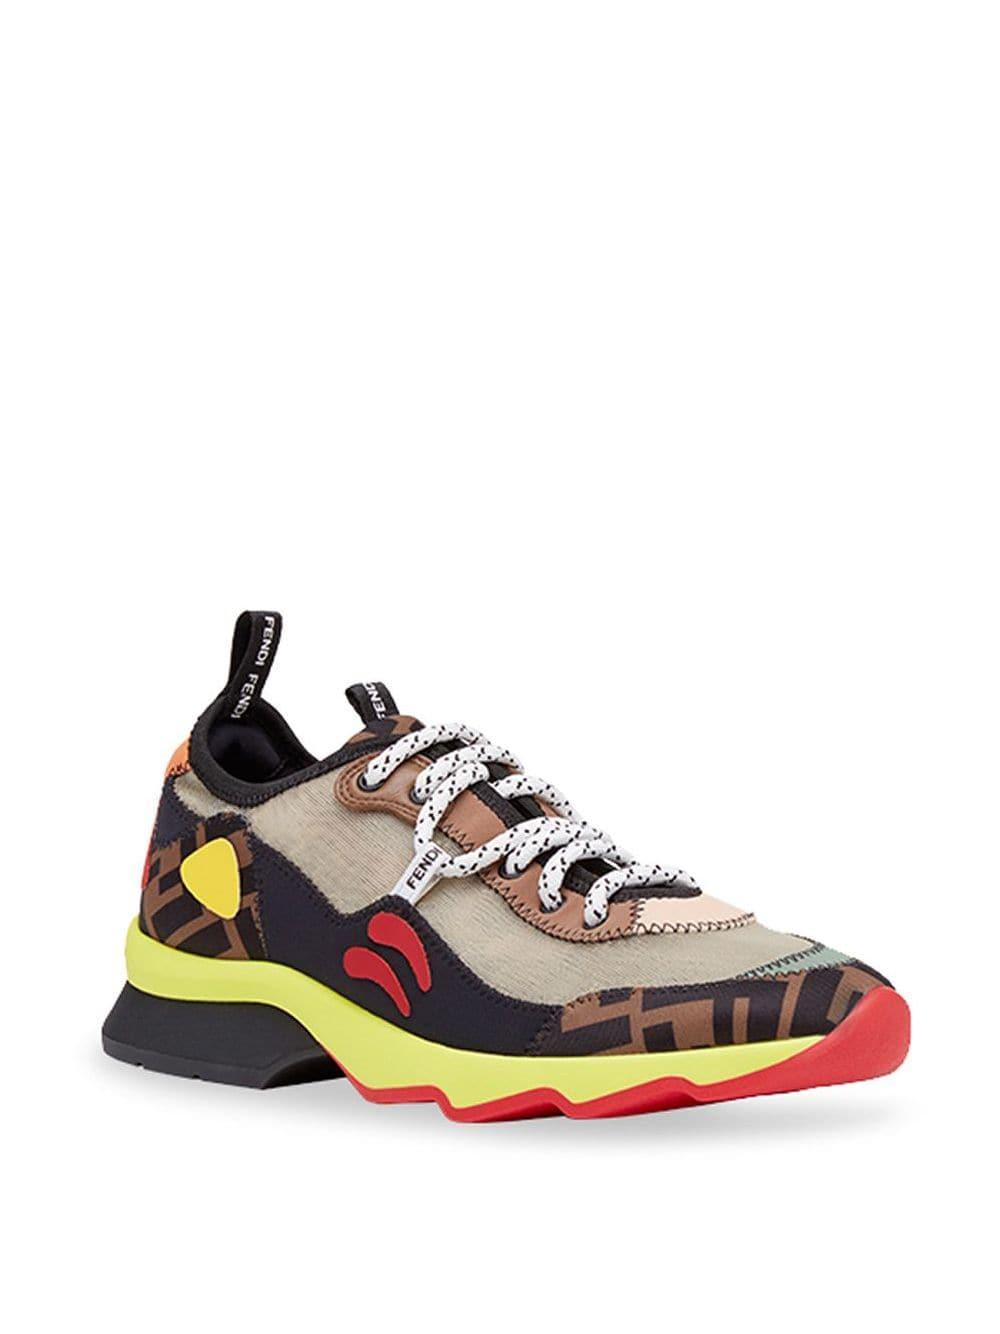 Fendi Synthetic Multicolour Technical Mesh Sneakers in Brown - Lyst